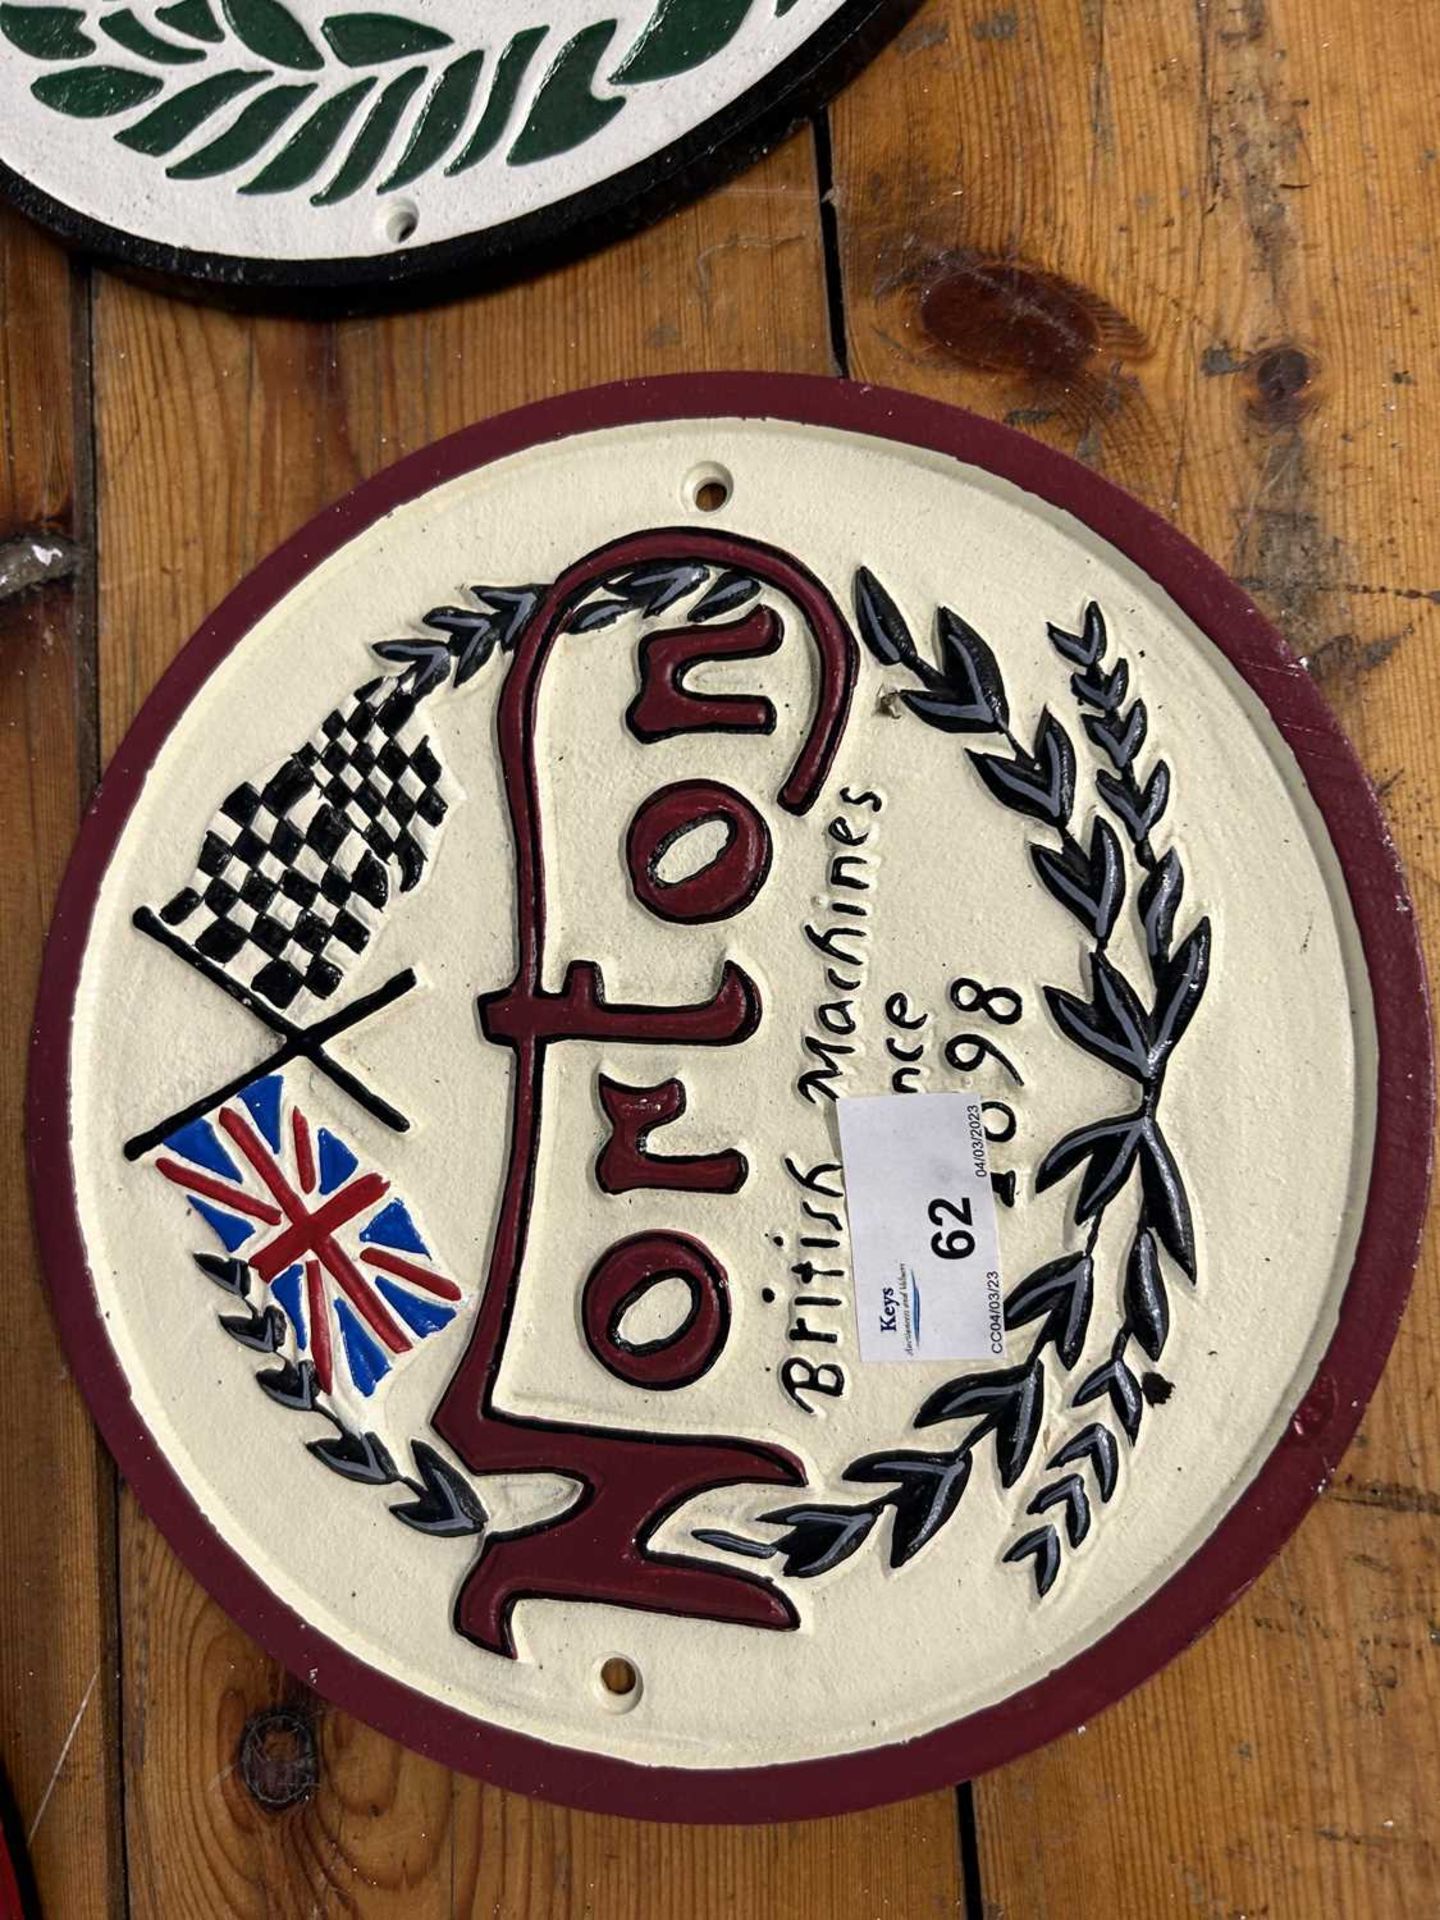 Norton Motorcycles cast advertising sign, width approx 22cm